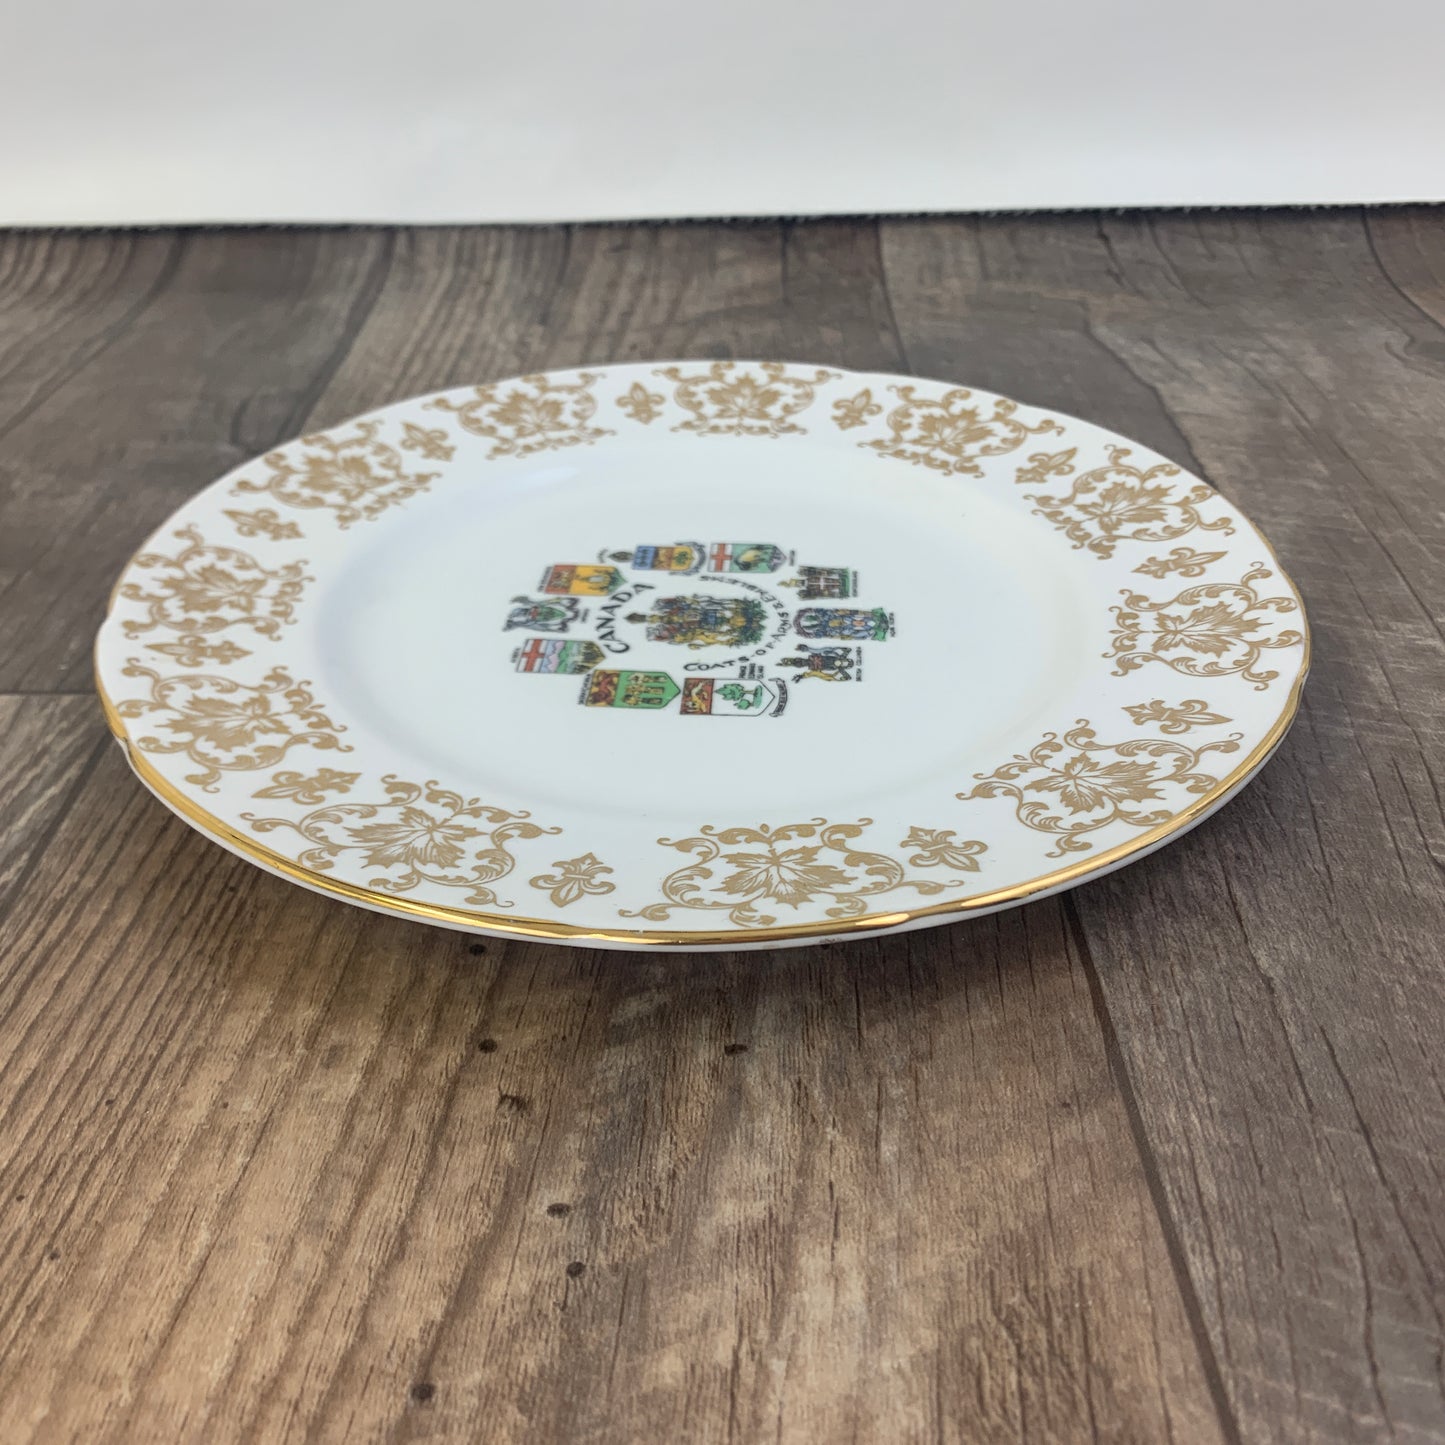 Canadian Provincial Emblems Paragon China Luncheon Plate Fine Bone China Plate